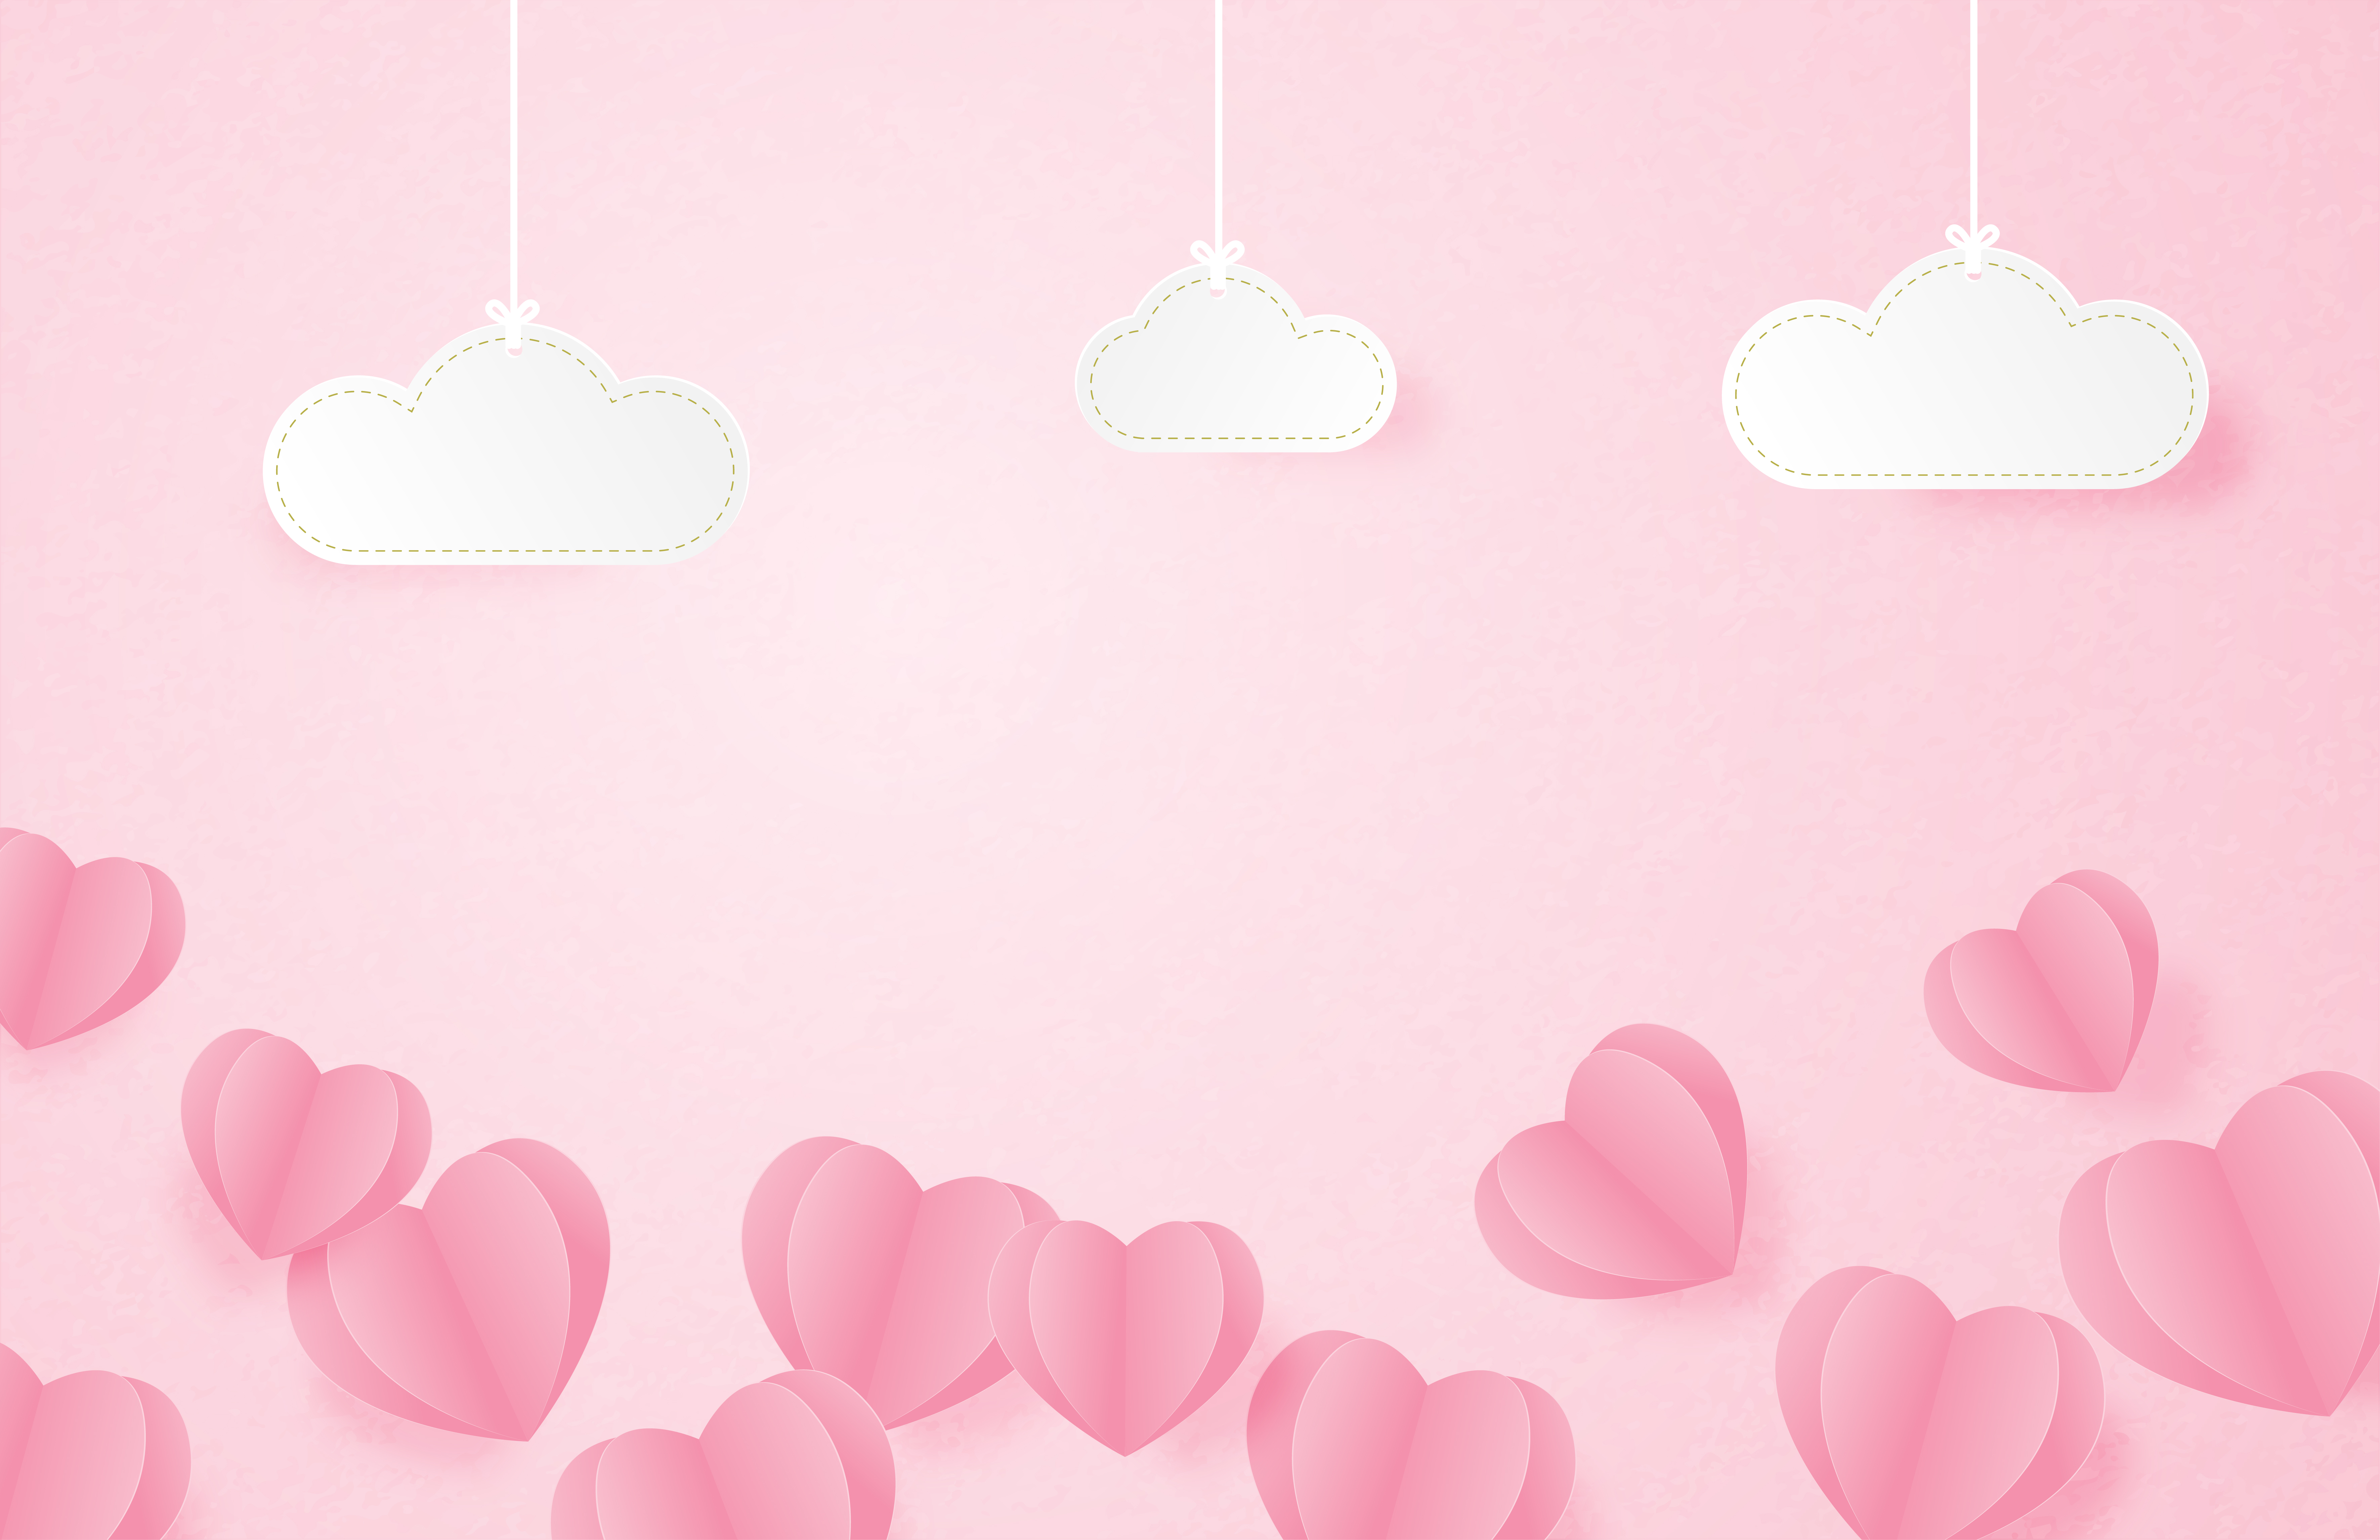 Valentine's day banner with heart shapes and clouds